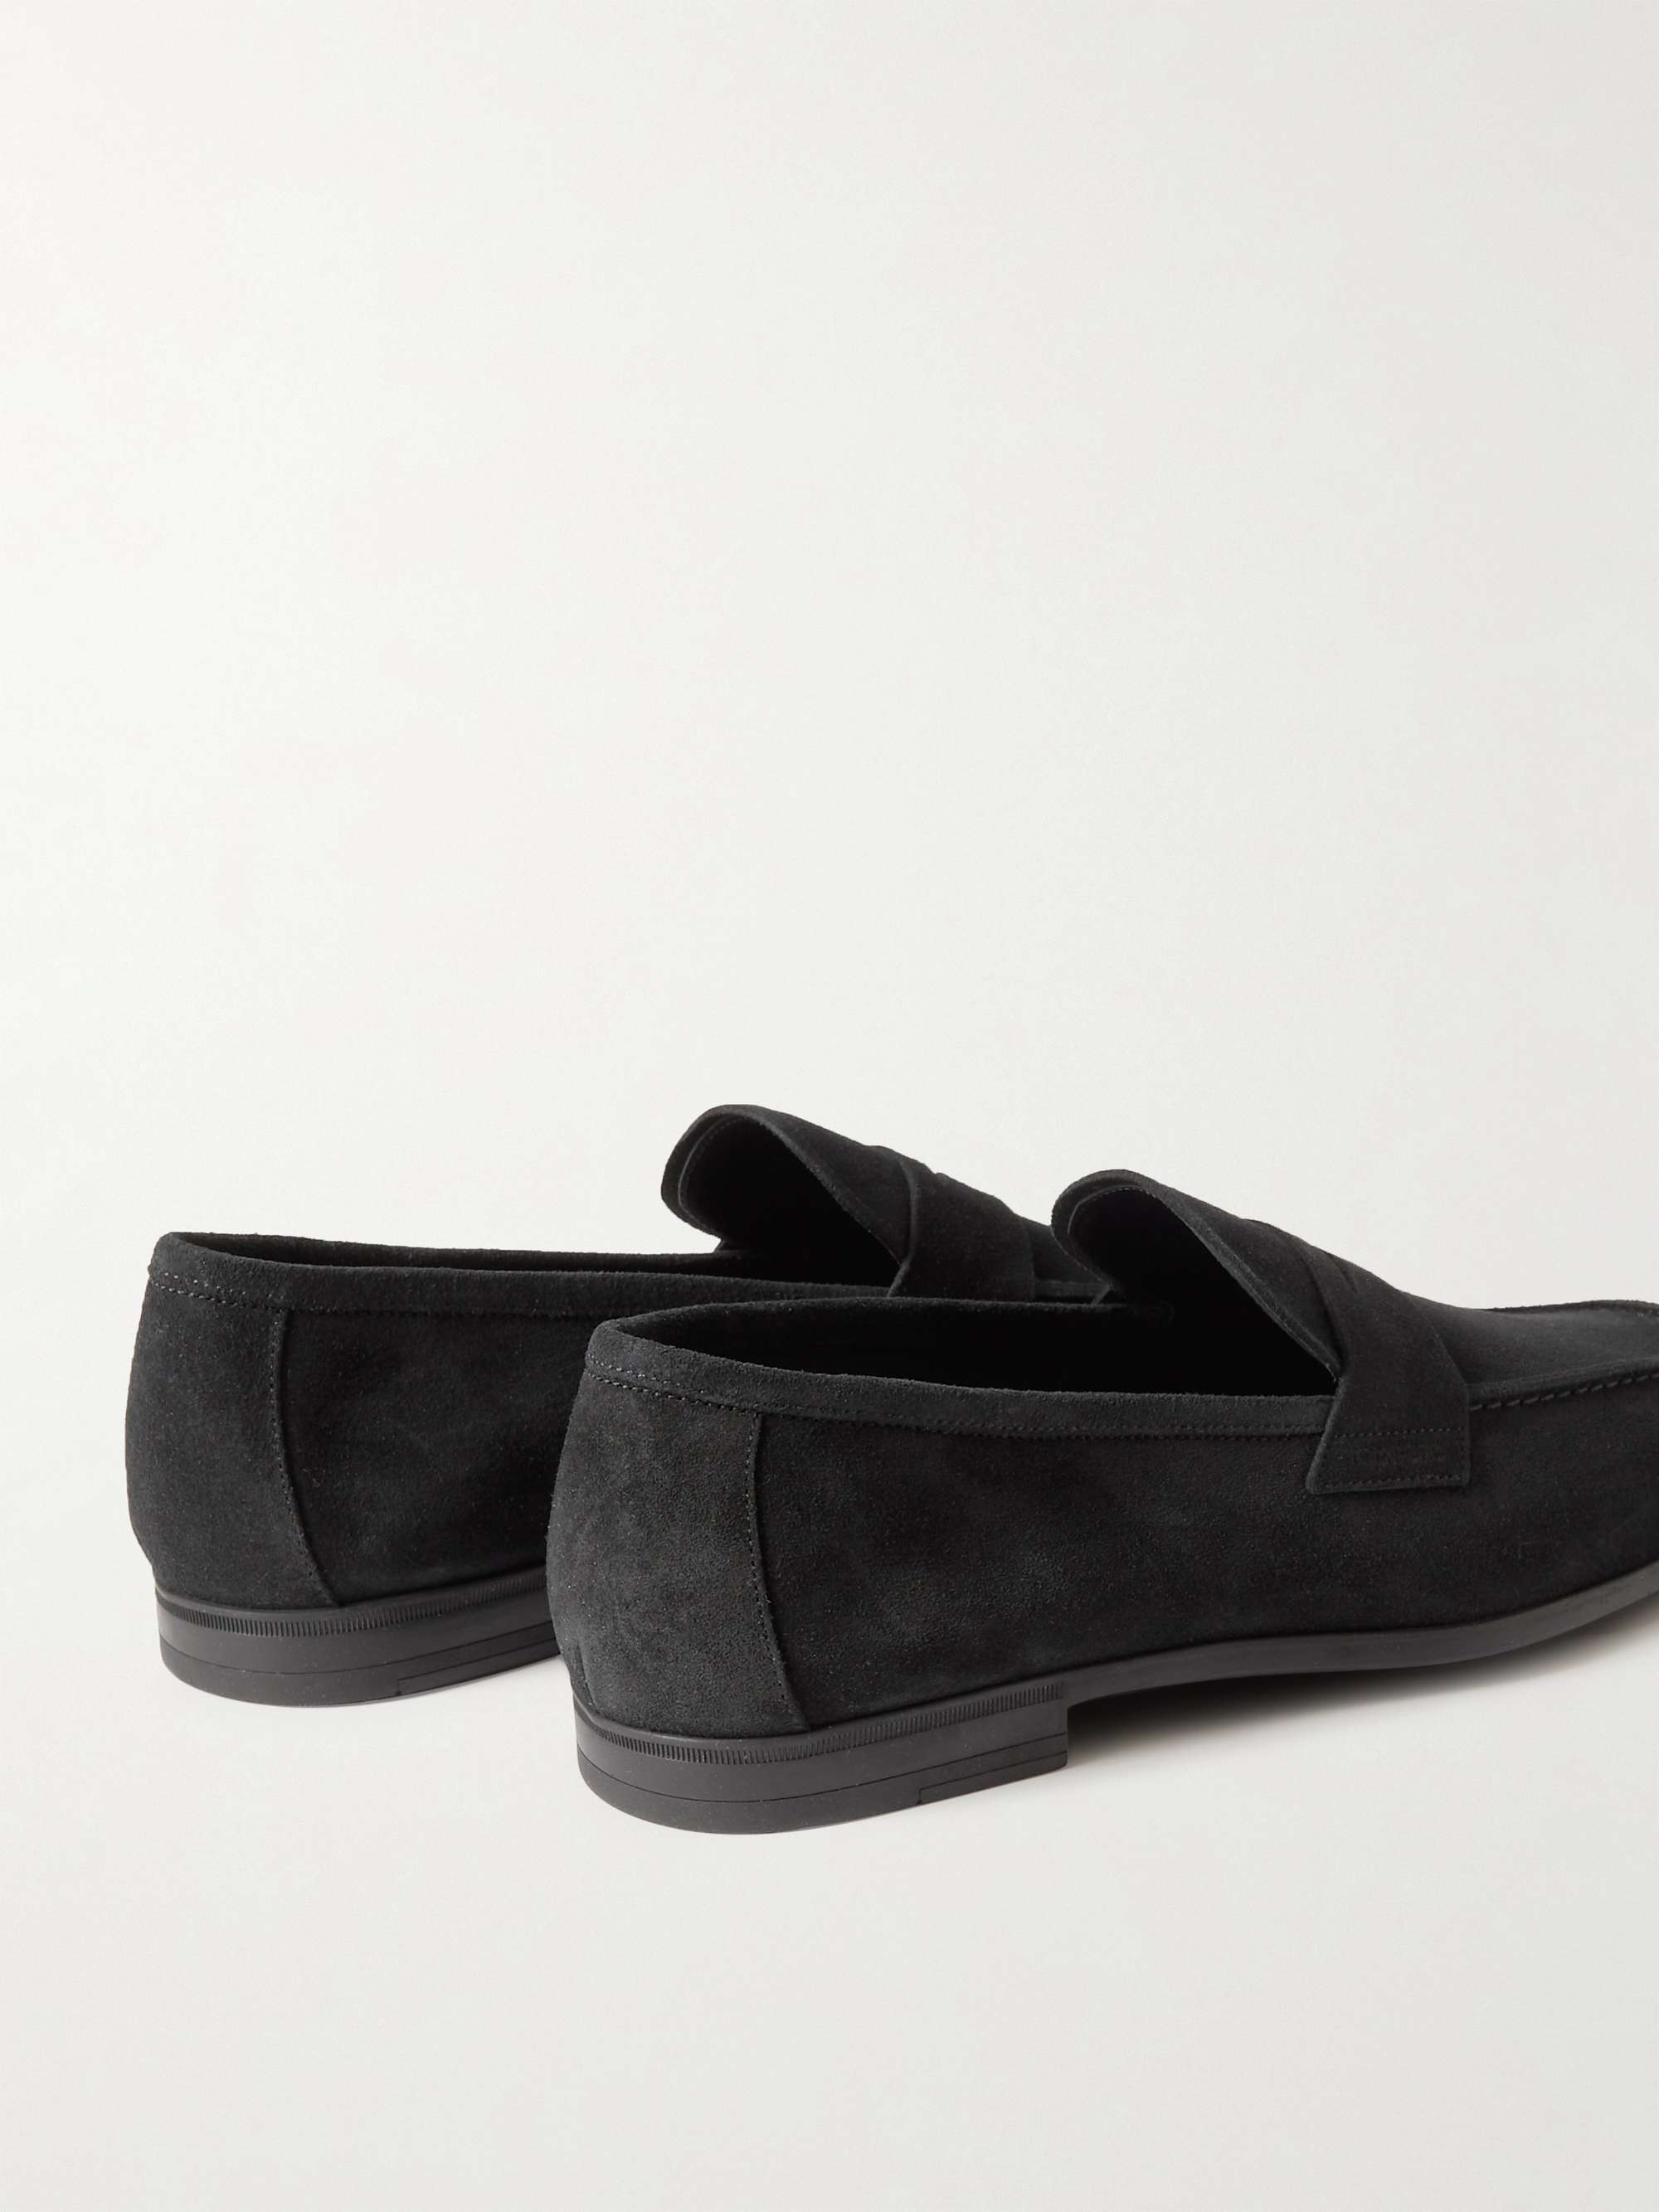 TOM FORD Sean Leather Penny Loafers